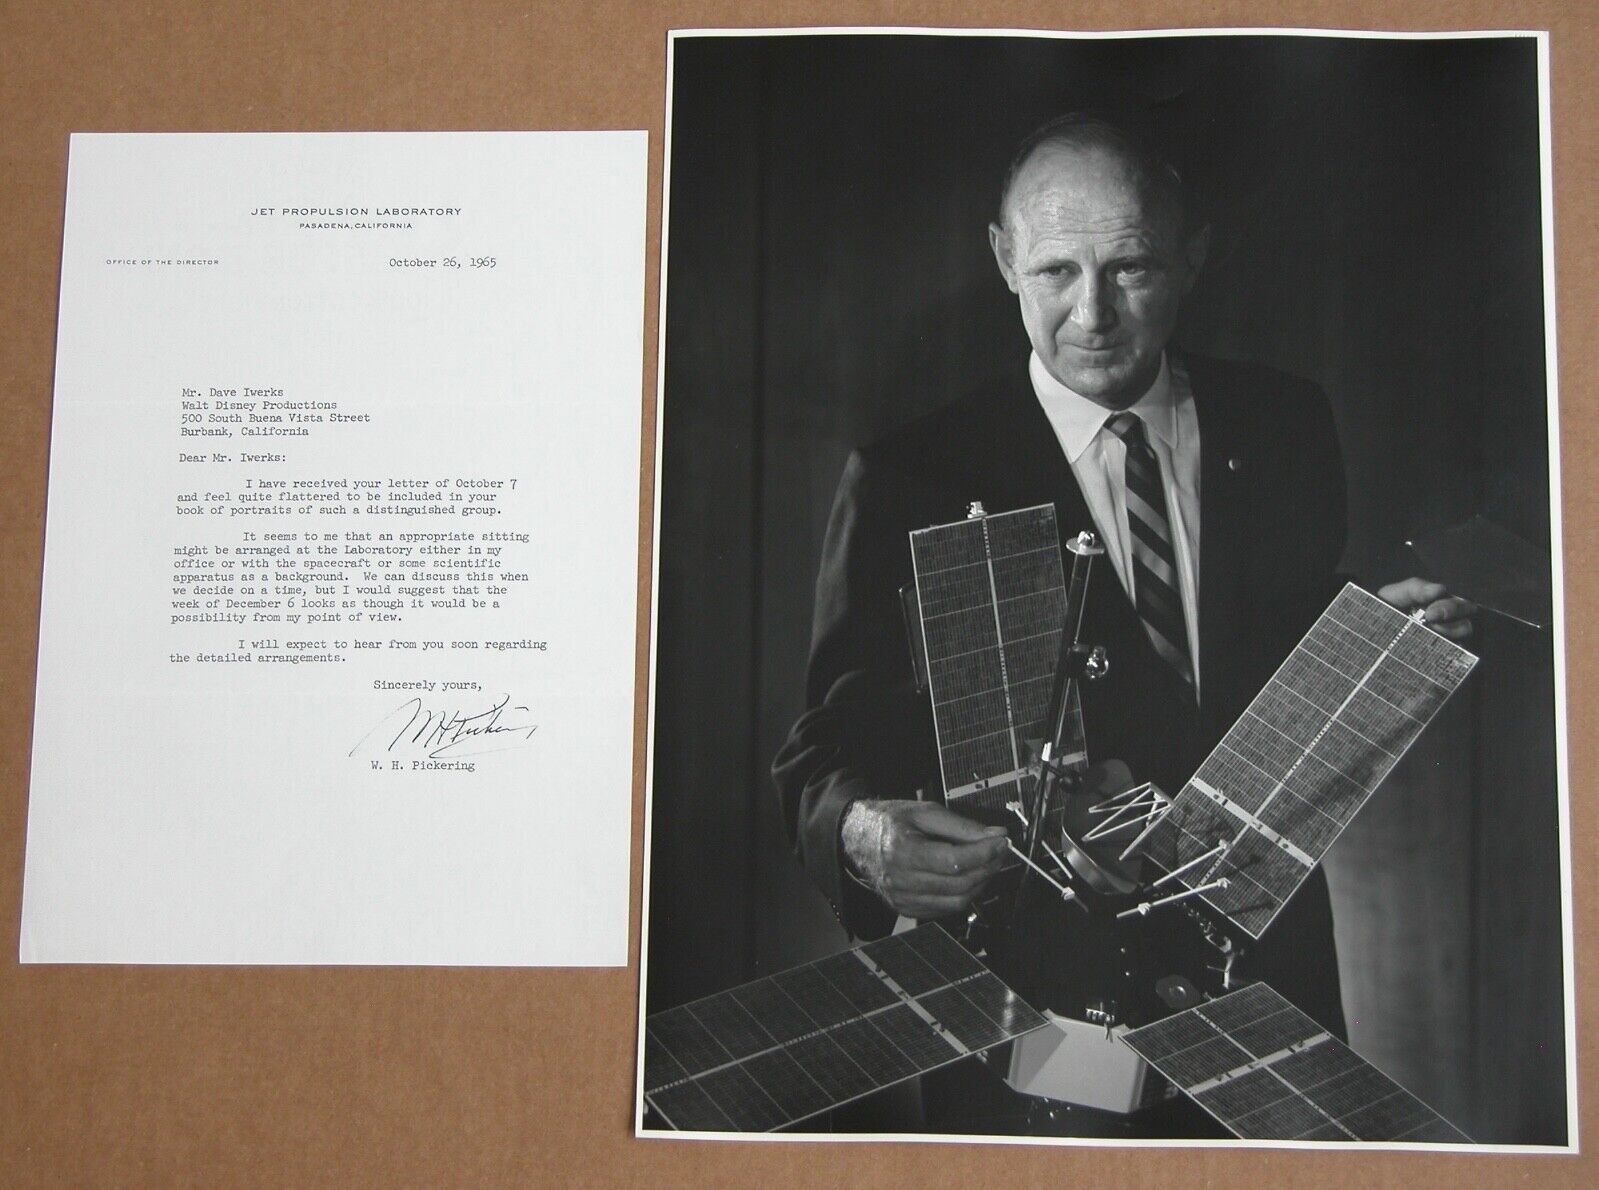 William Henry Pickering 1960s Signed Letter & Photograph Dave Iwerks Astronomer